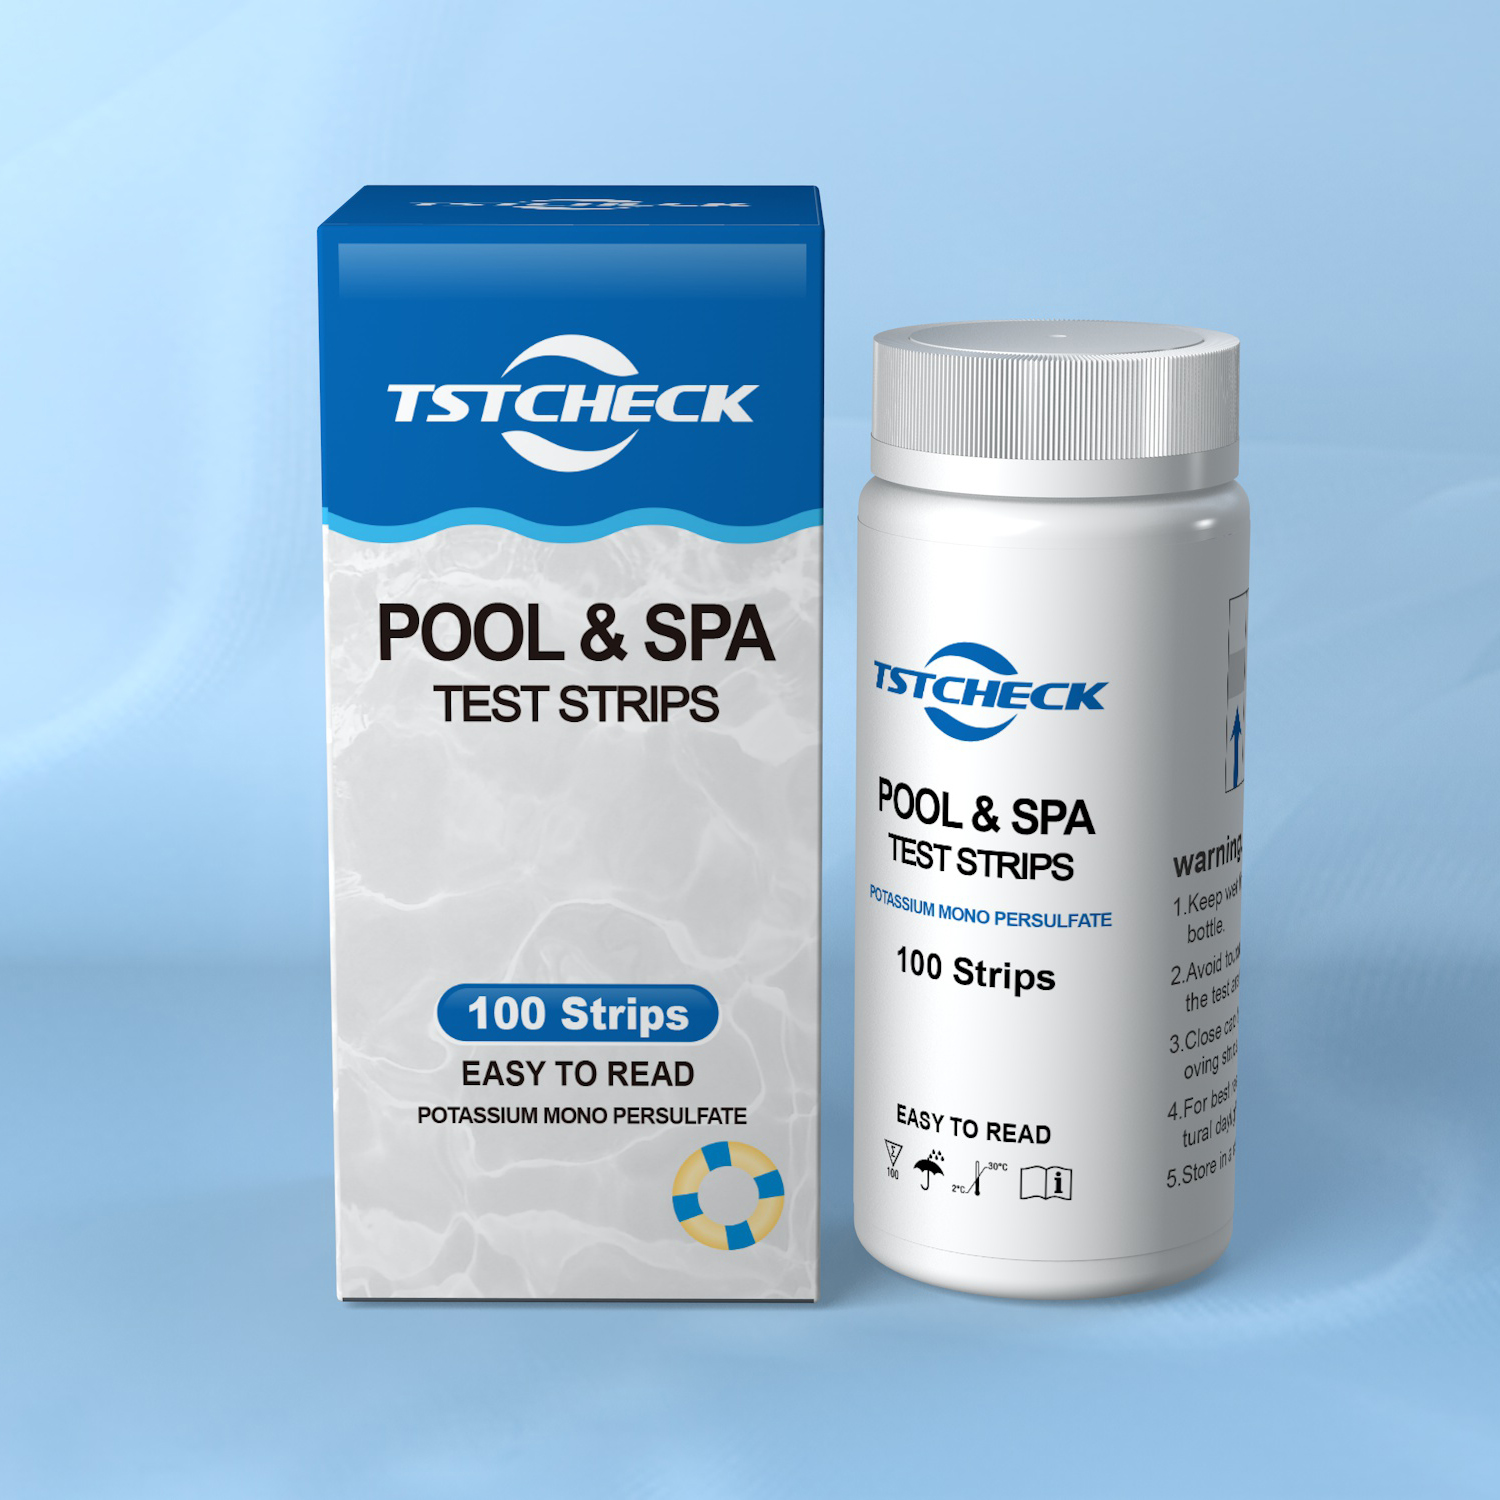 MPS Potassium Monopersulfate Test Strips For Pool And Spa